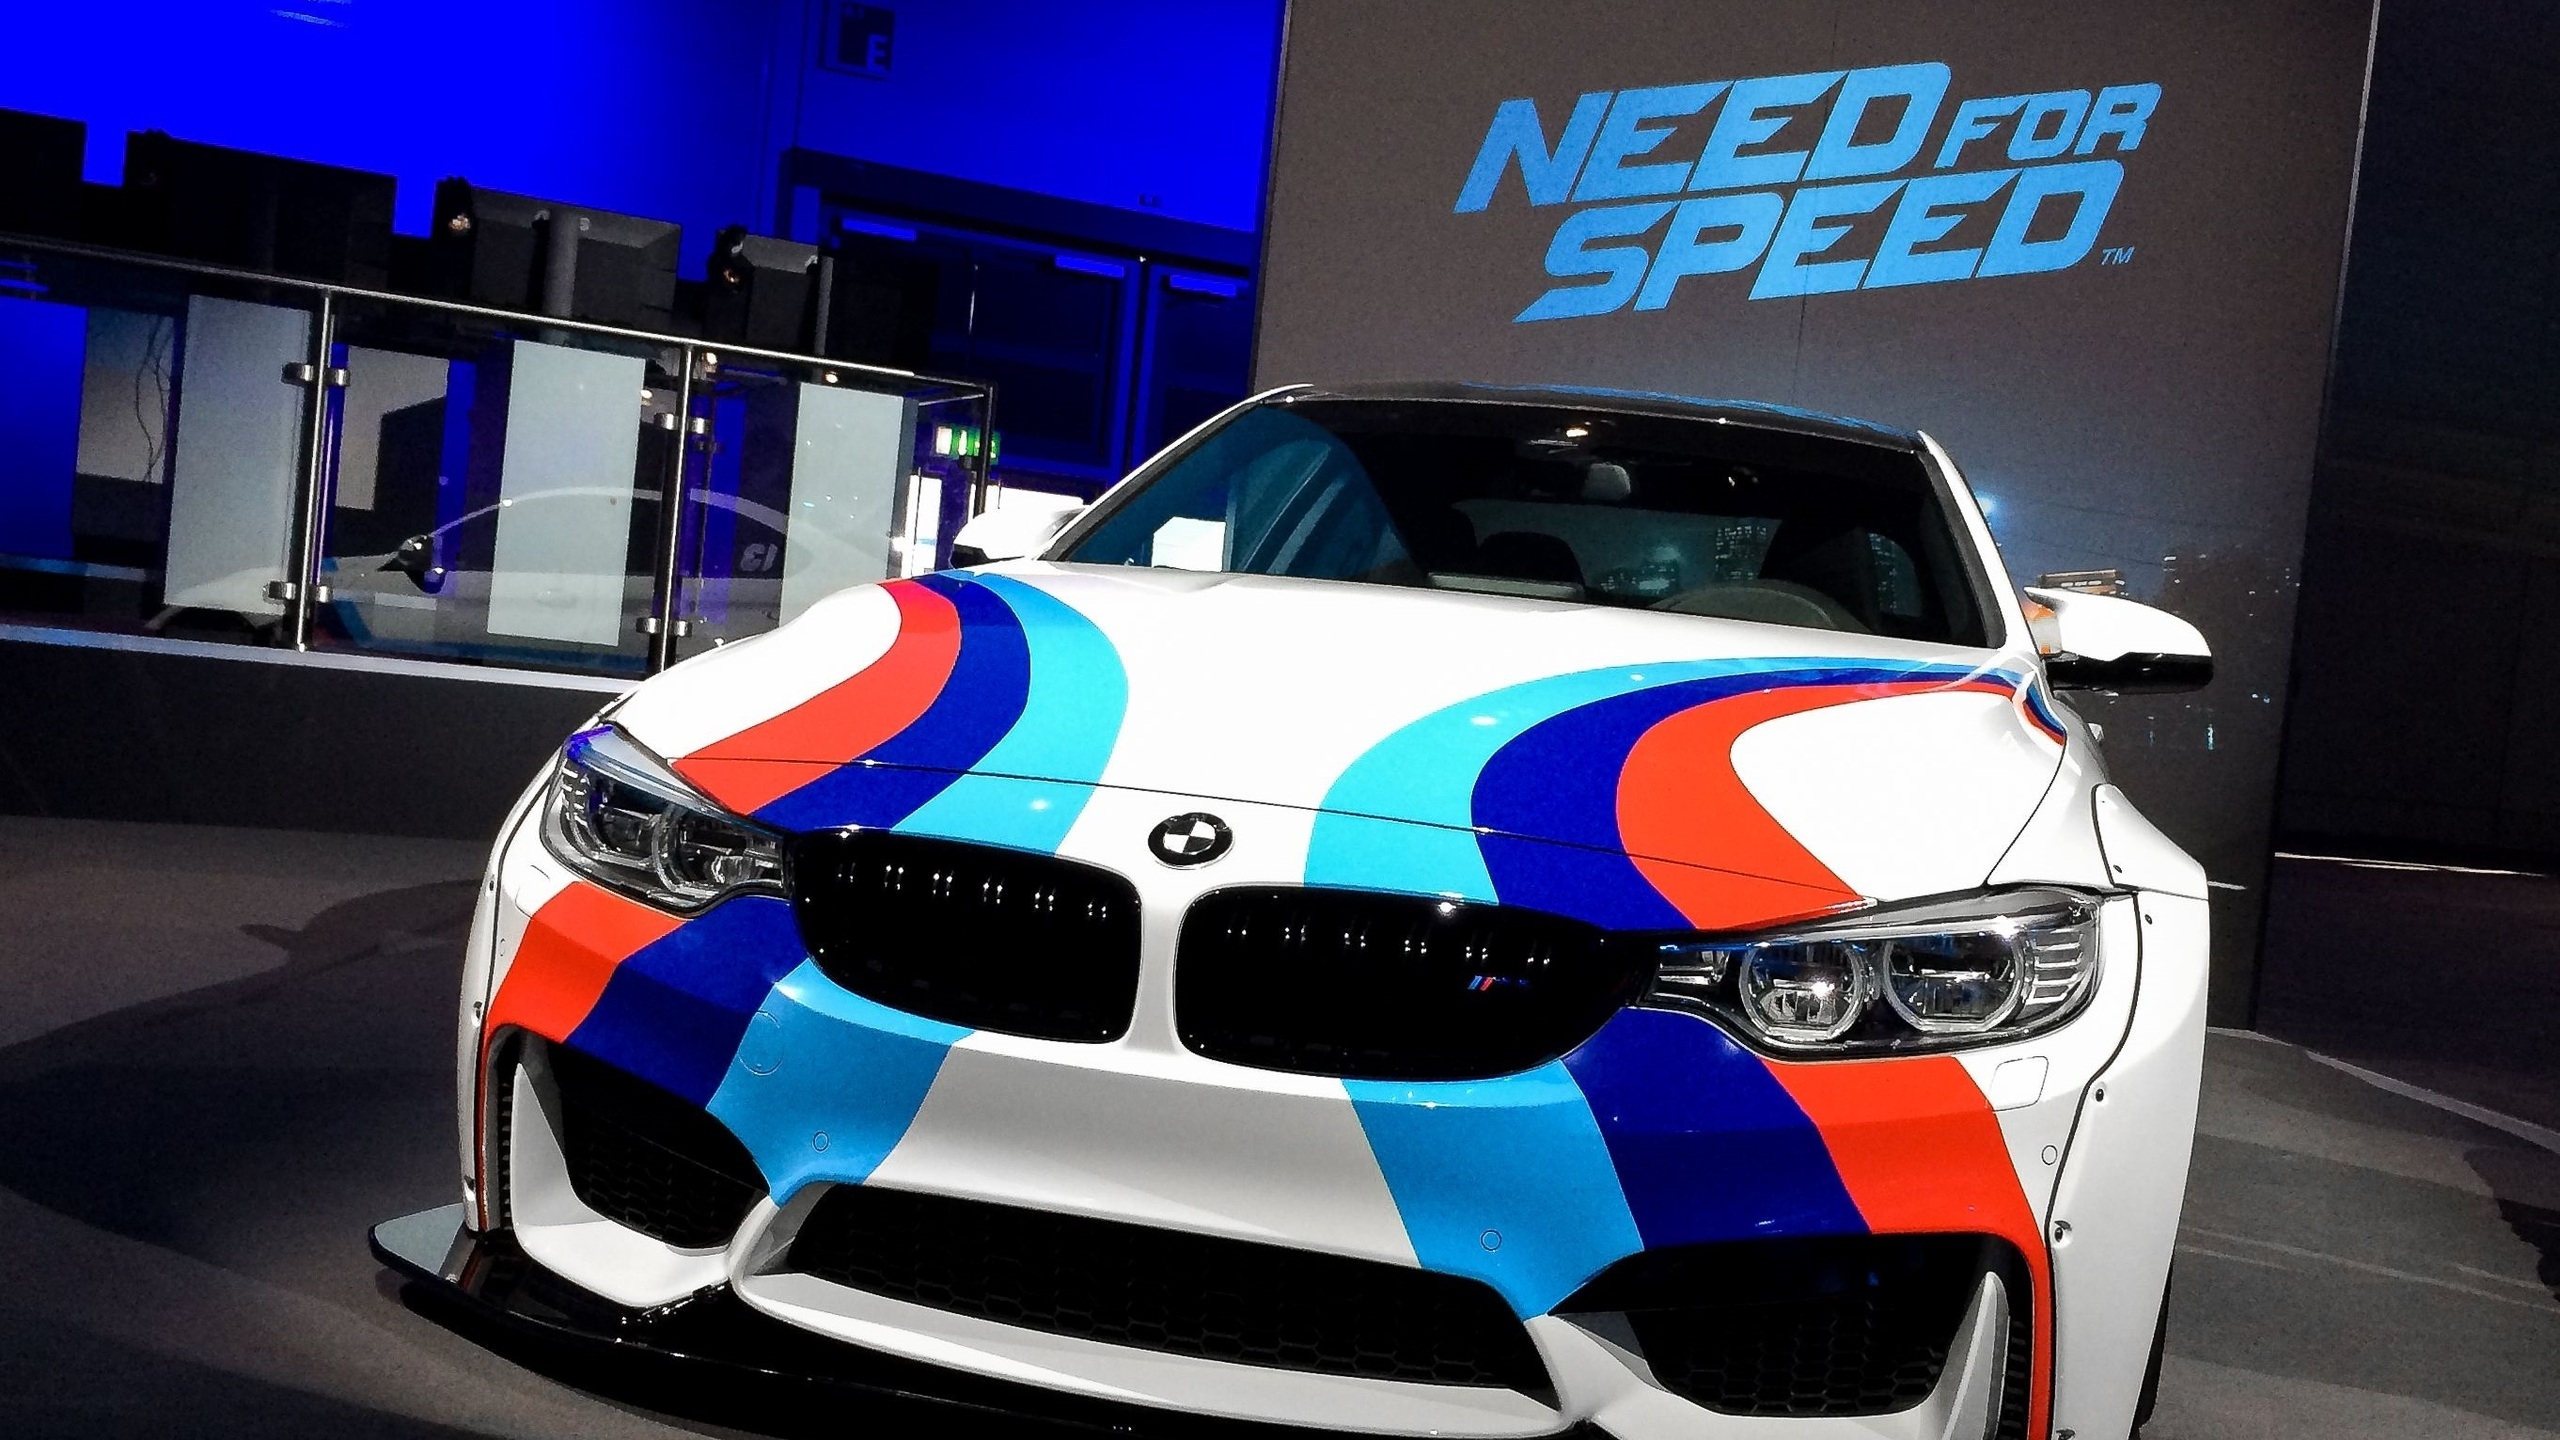 Need For Speed BMW for 2560x1440 HDTV resolution